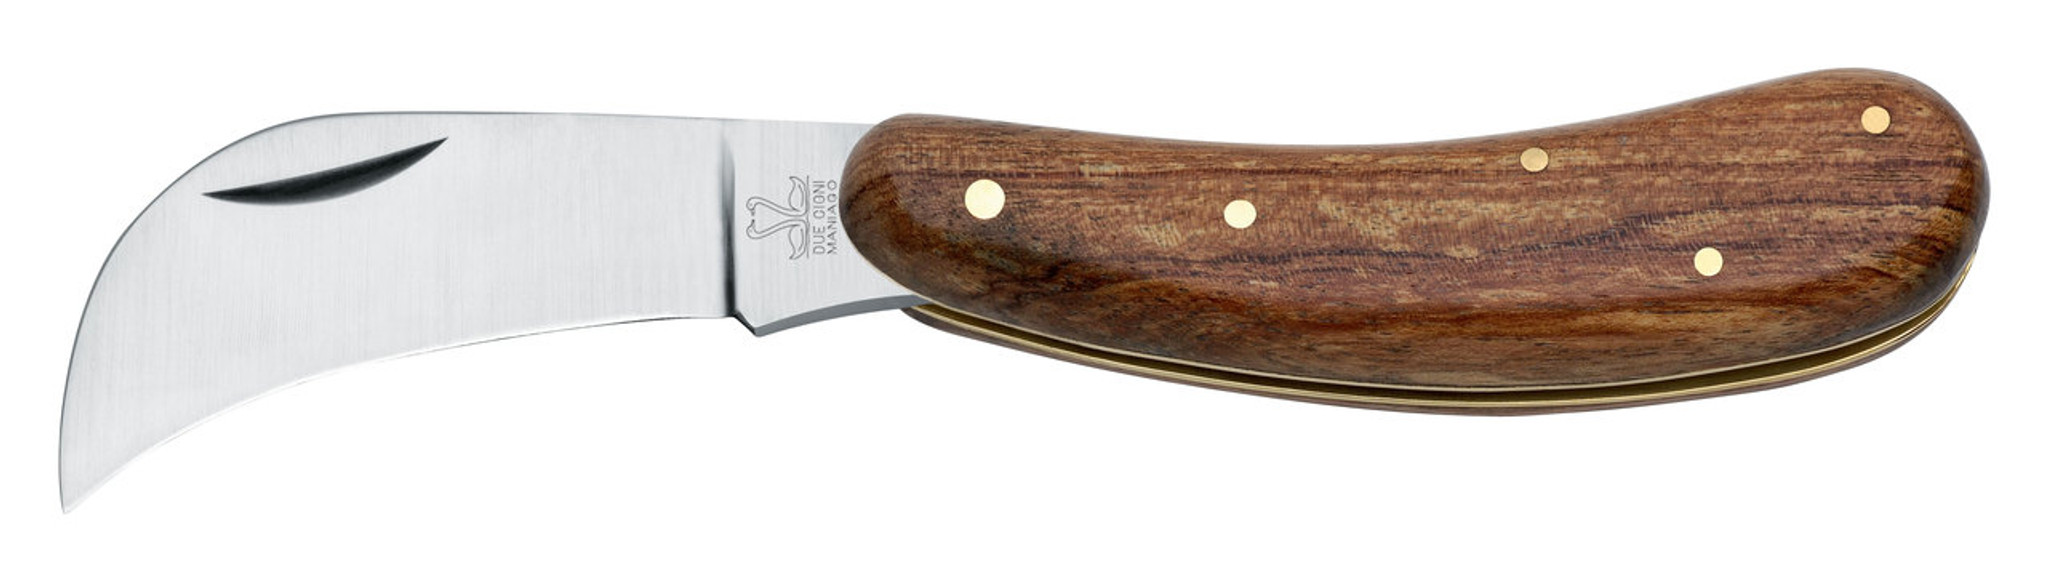 Due Cigni Runcola/ Billhook knife (DC-3) - Seeds from Italy